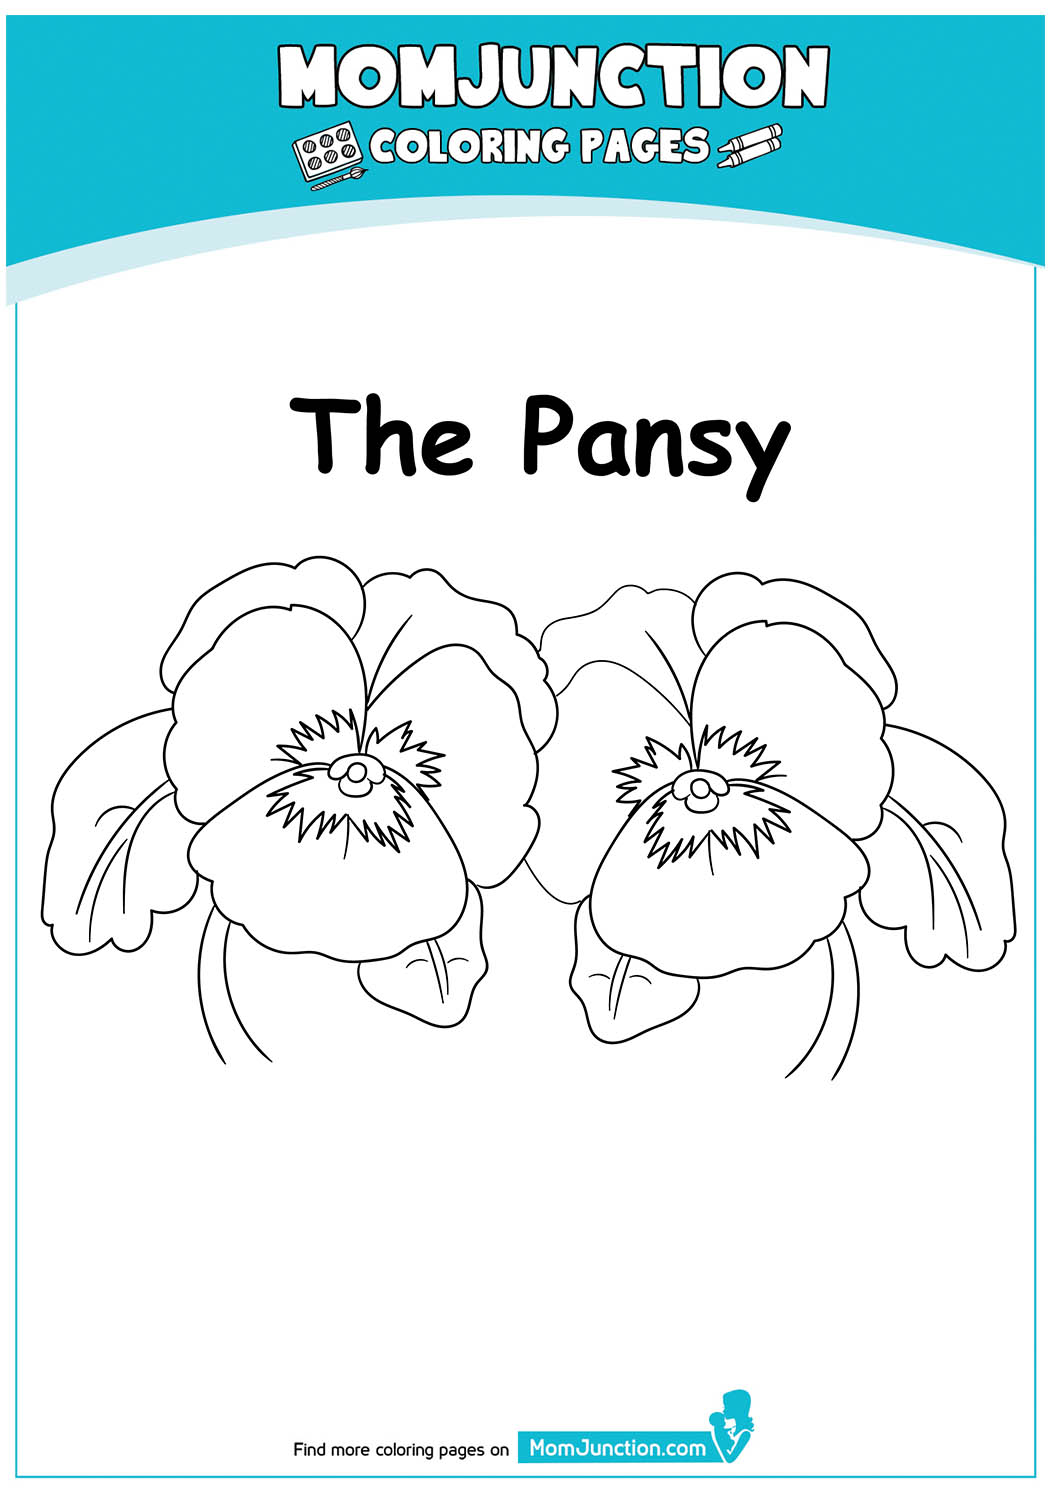 The-Pansy-17